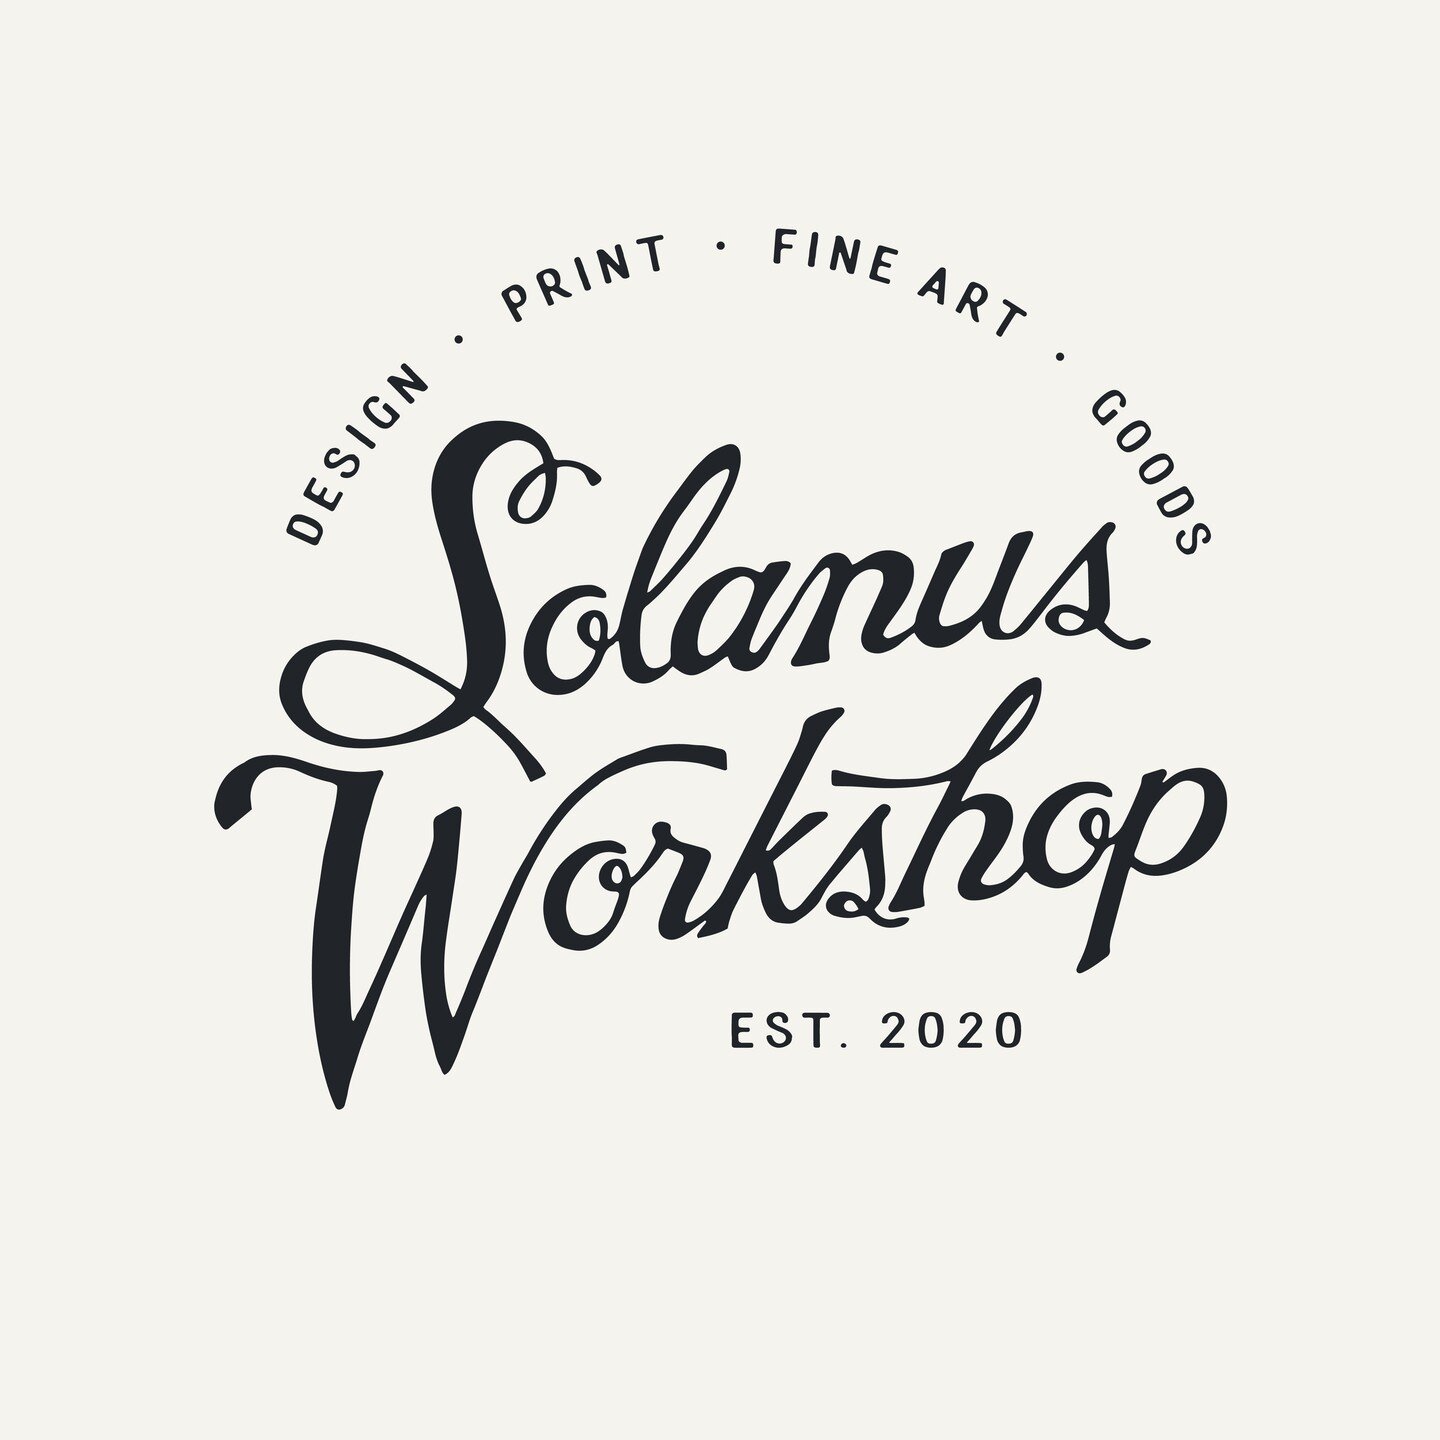 We back.
(I feel like half of our posts begin this way🙄...)
We spent January reworking our website and logo and in the process came up with an idea to continue Solanus Workshop in a way that is more in line with what we wanted to do from the beginni